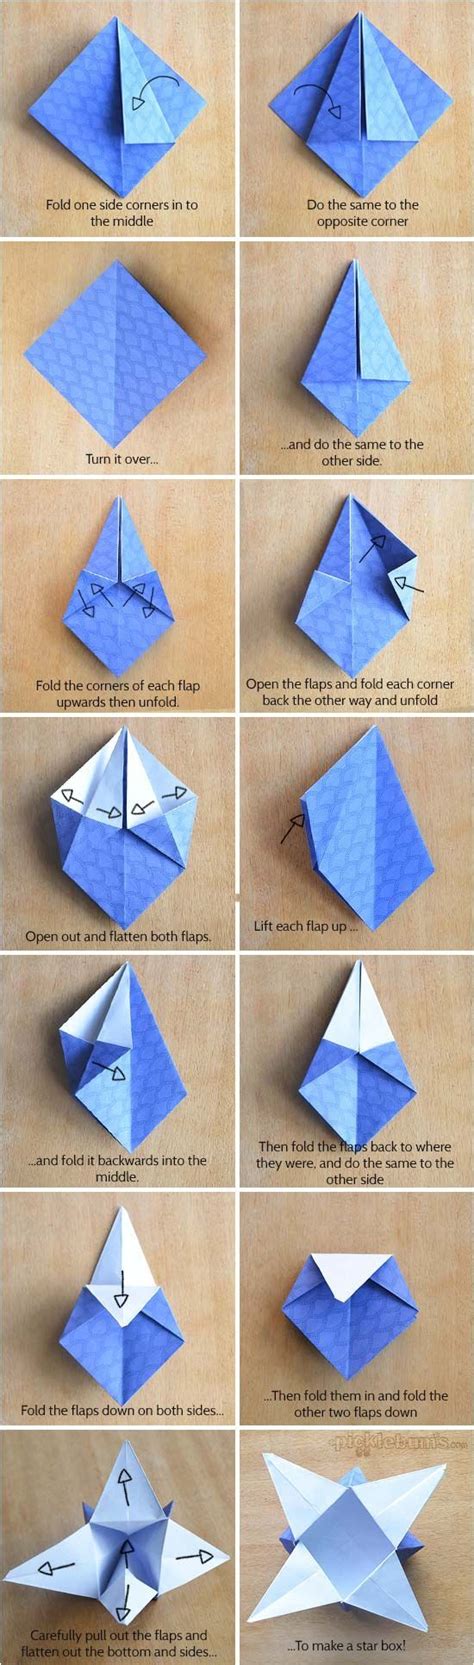 Learn how to fold an origami star with instructions below. Jack Morrison (jackmorrisonip6) | Origami design, Origami ...